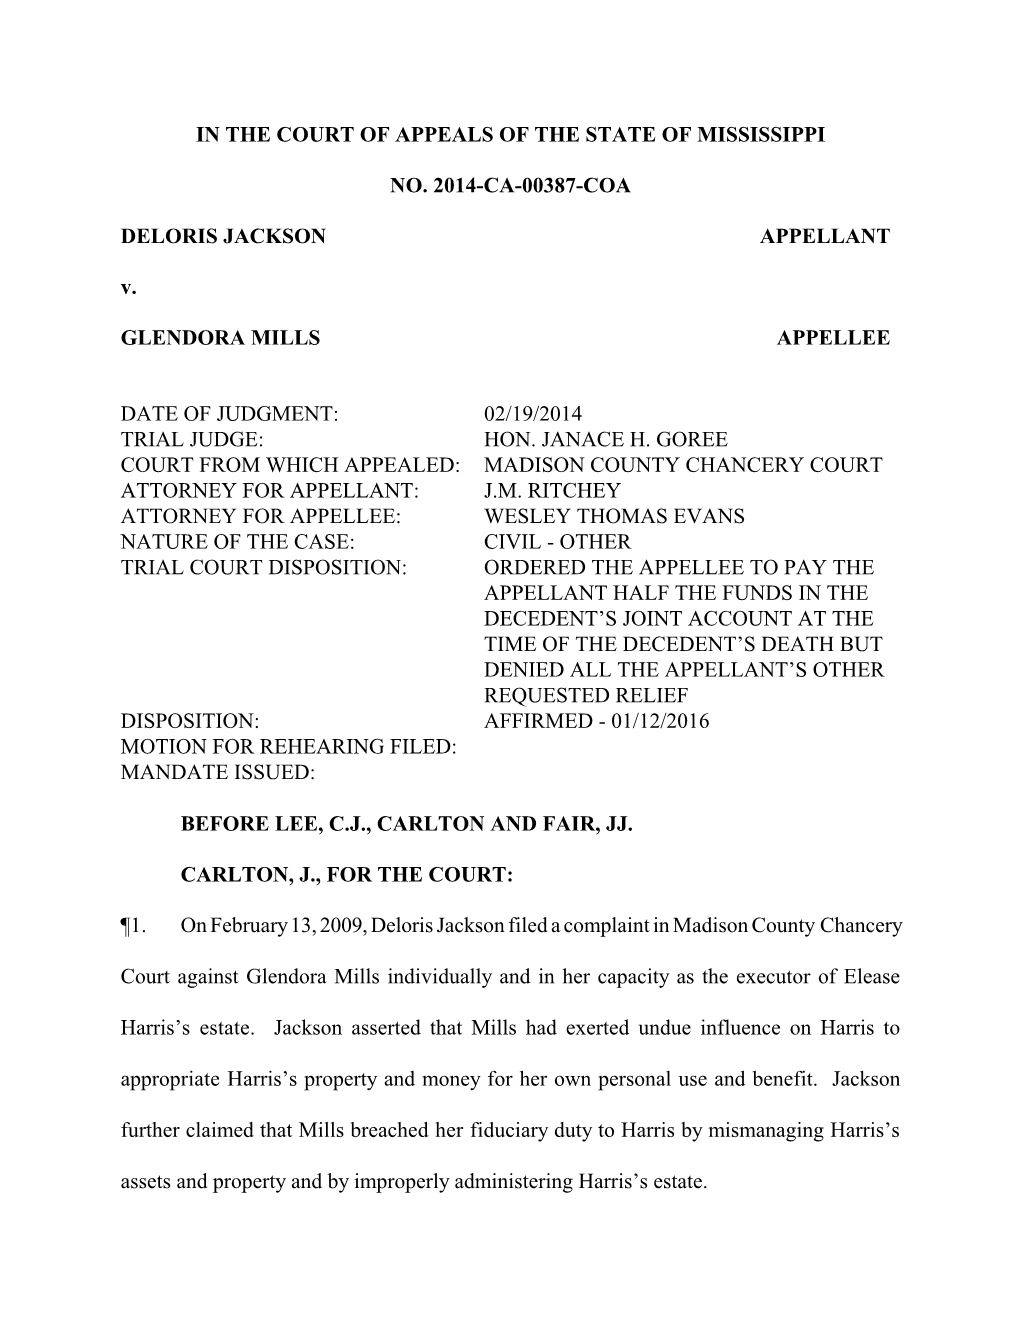 IN the COURT of APPEALS of the STATE of MISSISSIPPI NO. 2014-CA-00387-COA DELORIS JACKSON APPELLANT V. GLENDORA MILLS APPELLEE D